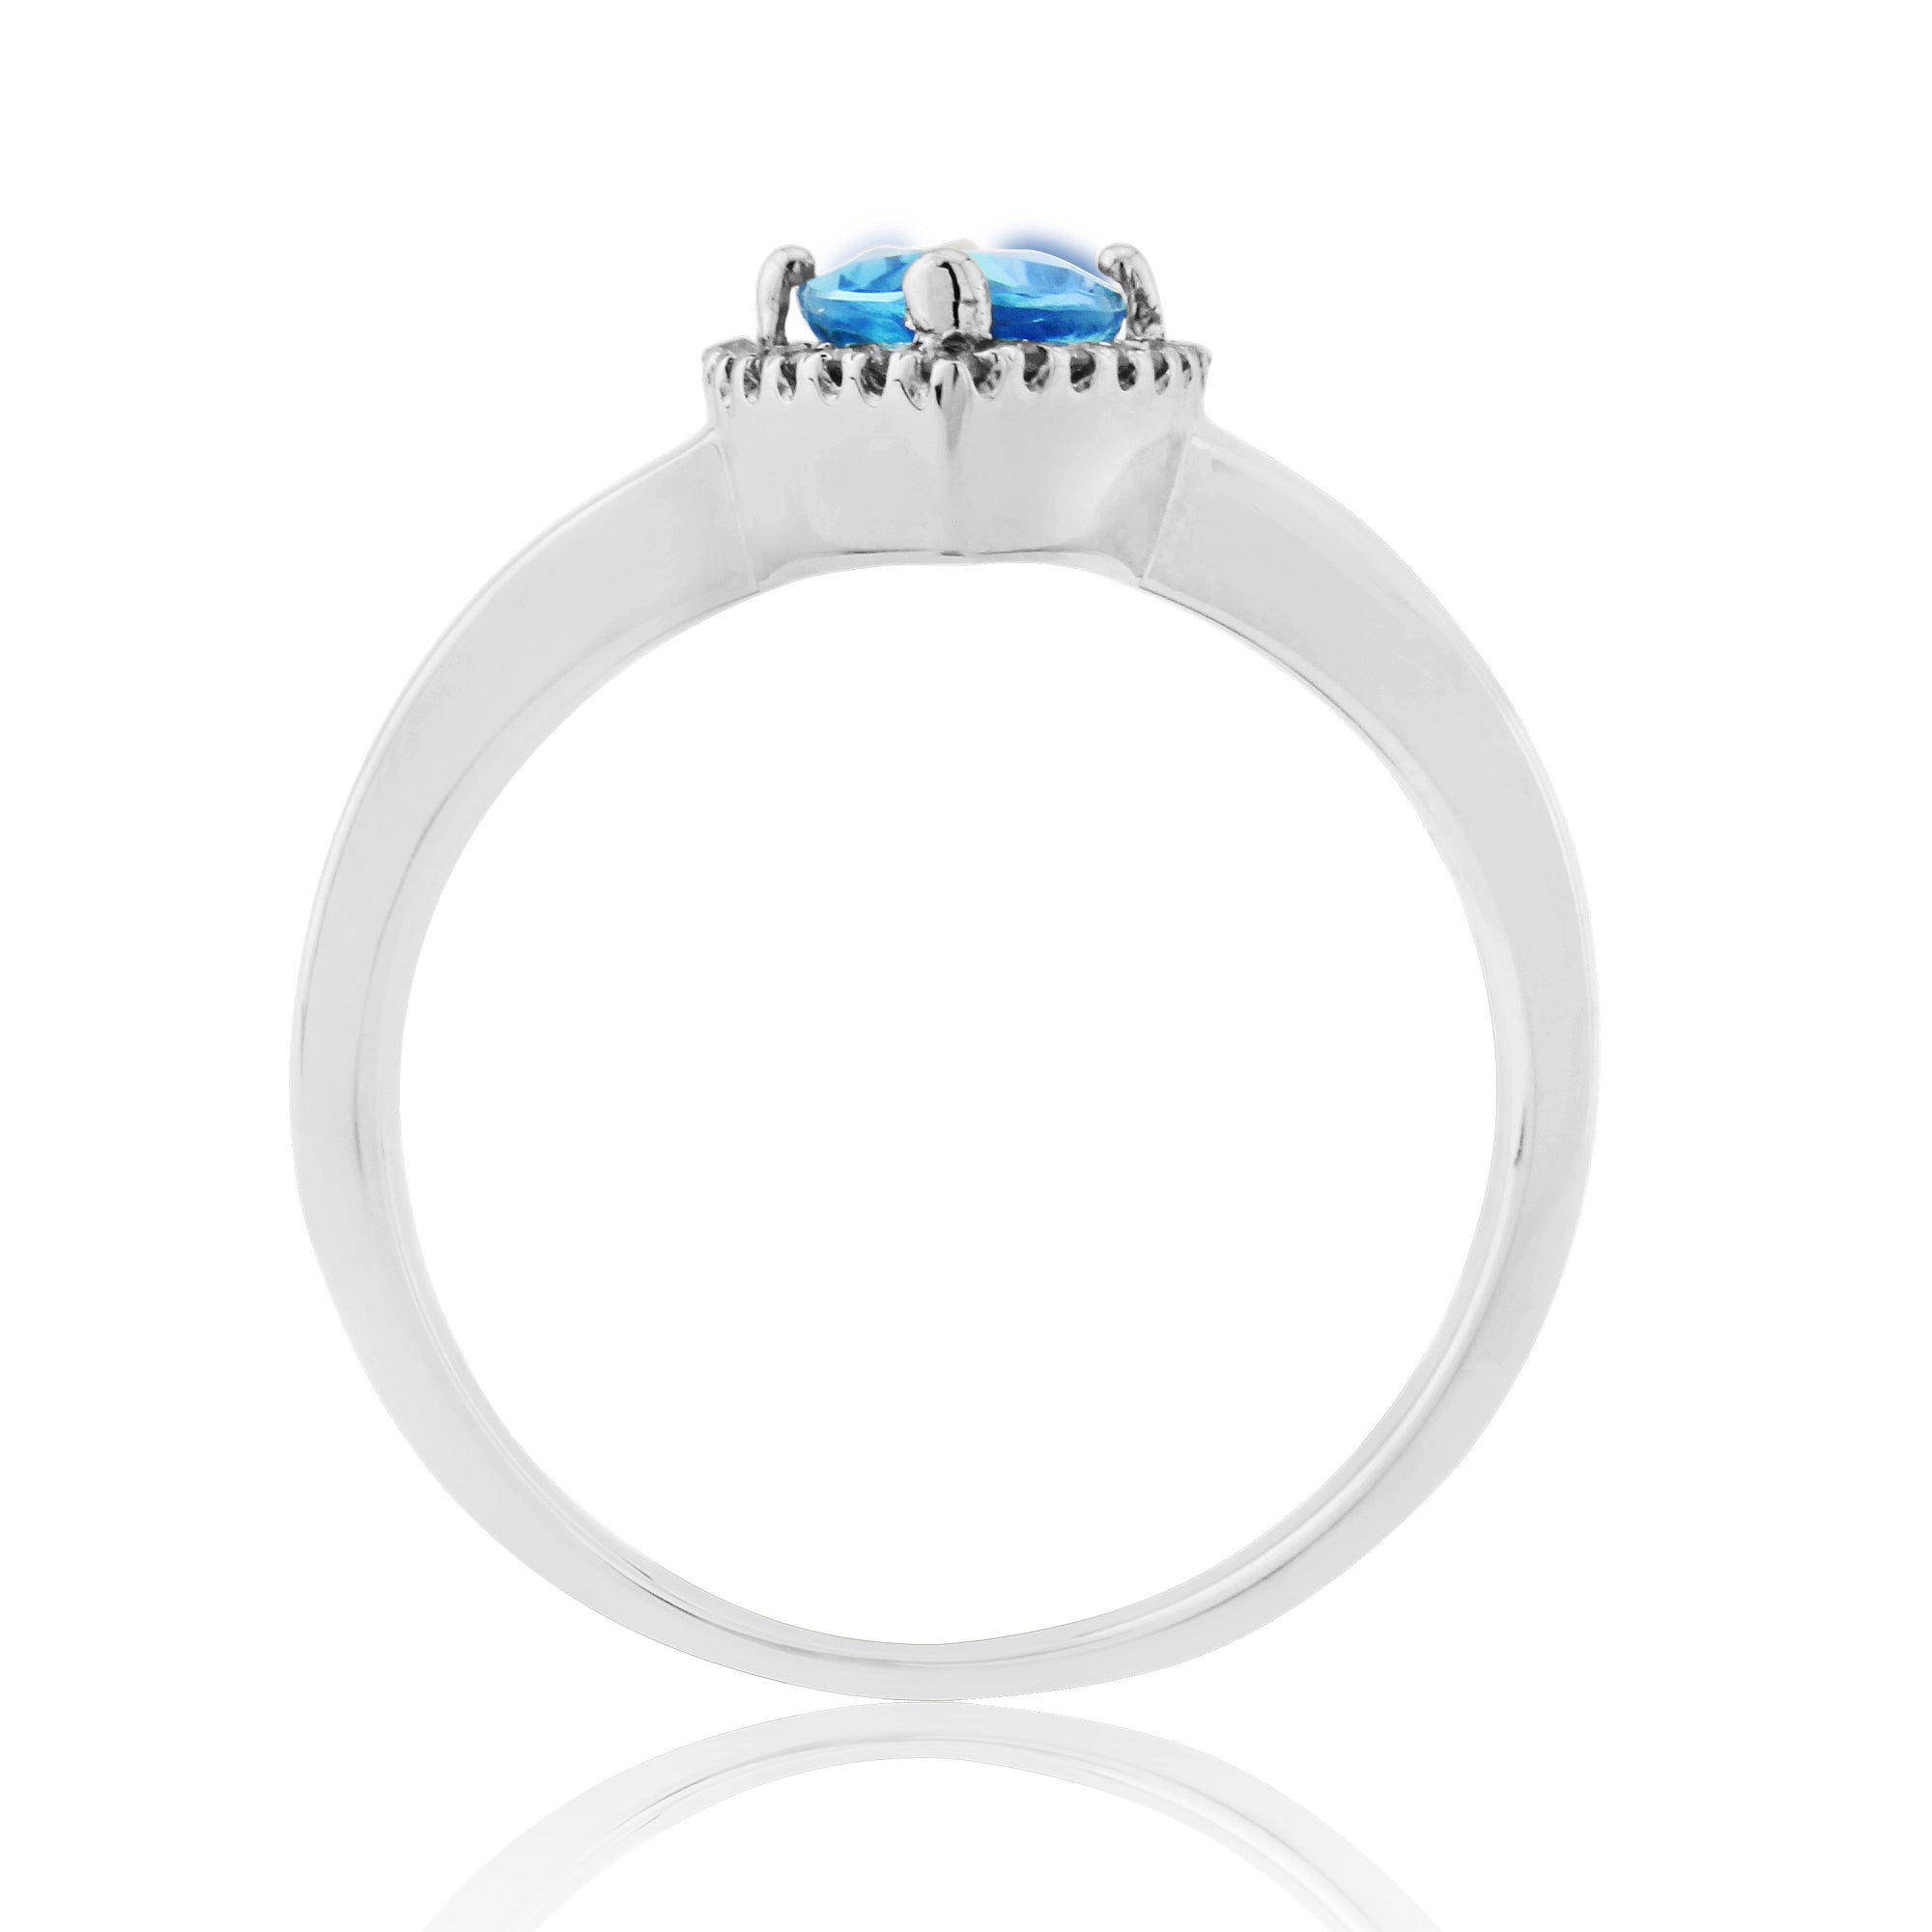 9ct white gold 10x5mm marquise shape blue topaz & diamond cluster ring 0.11ct